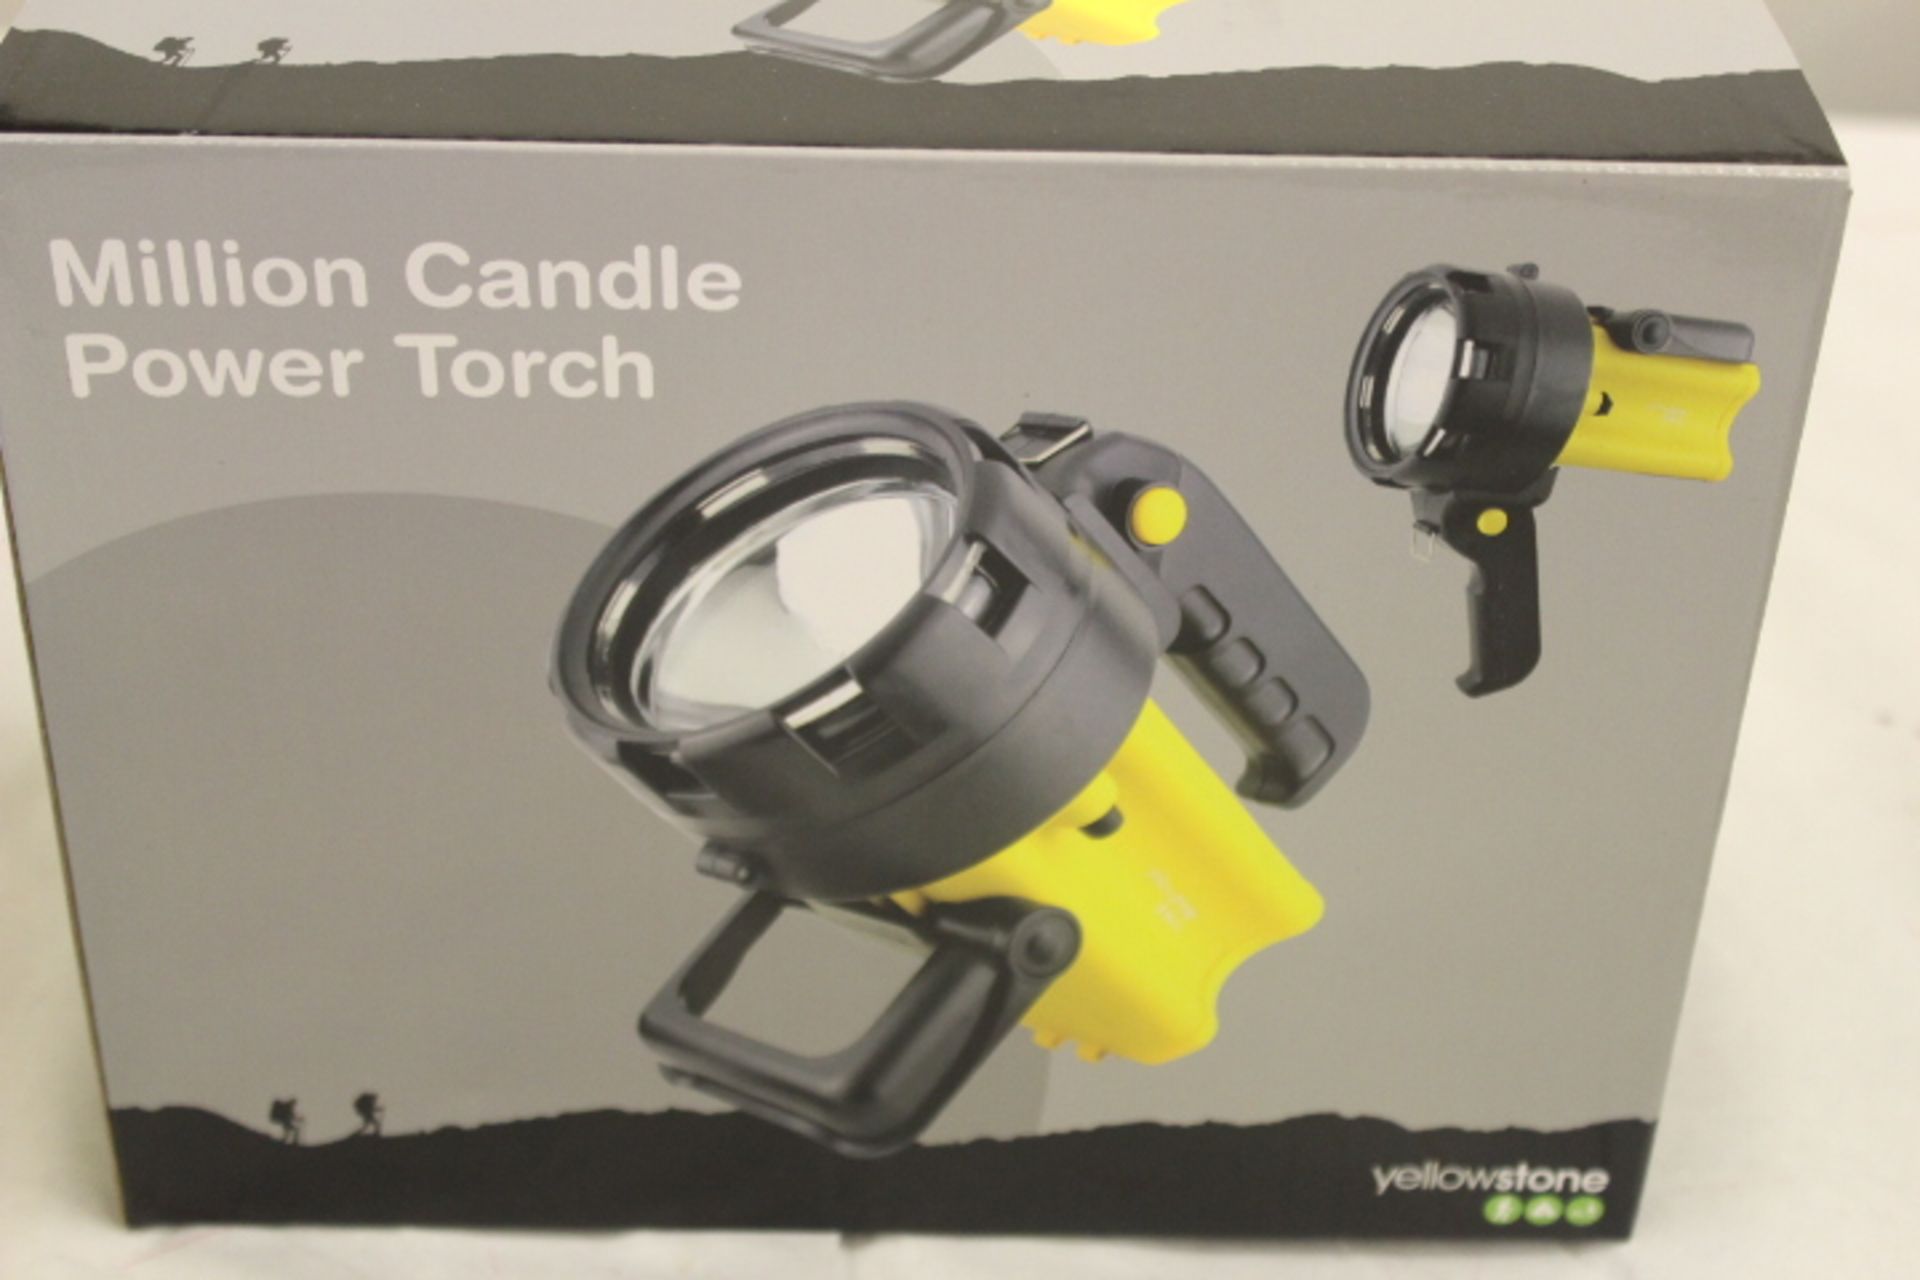 V Million Candle Re-chargable Power Torch RRP £34.99 - Weatherproof - Foot Stand - Carry Strap - 12v